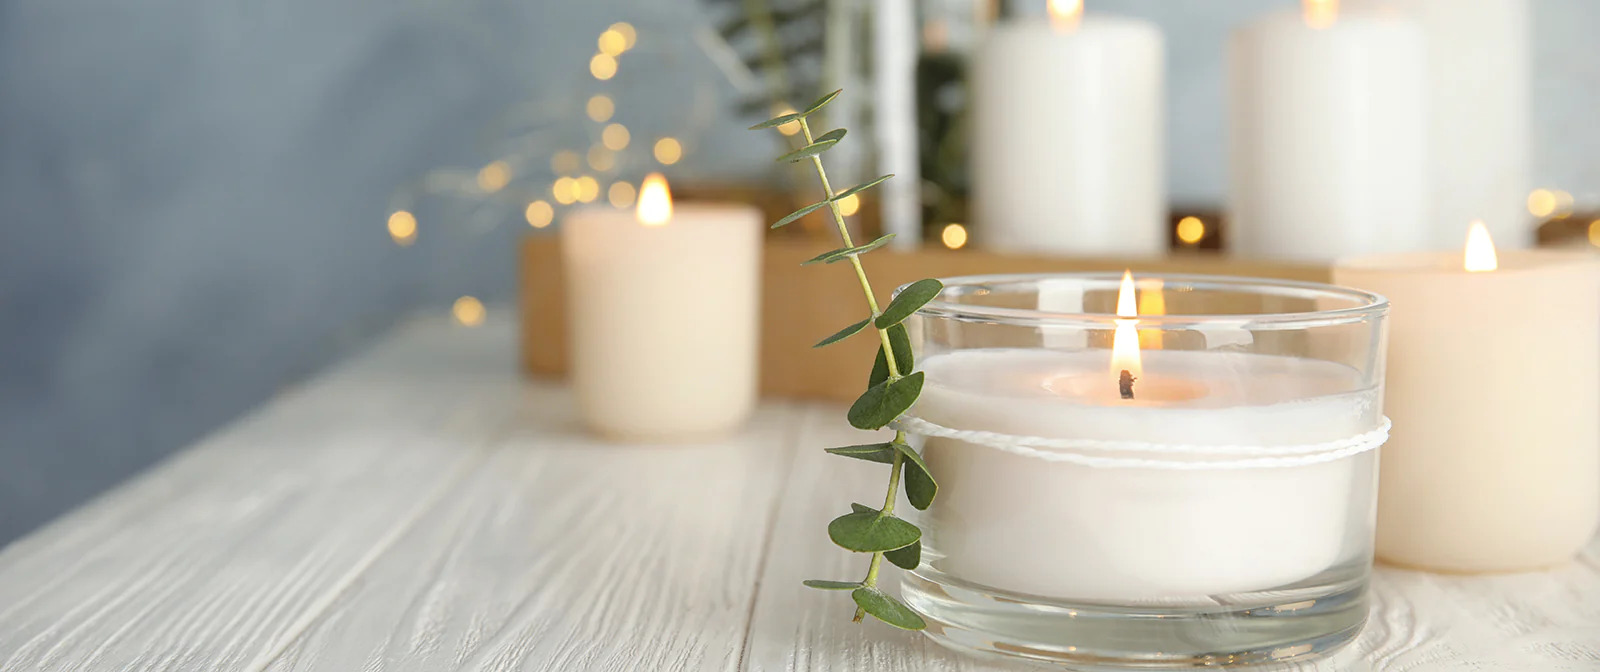 8 creative ways to Illuminate your space with votive candles